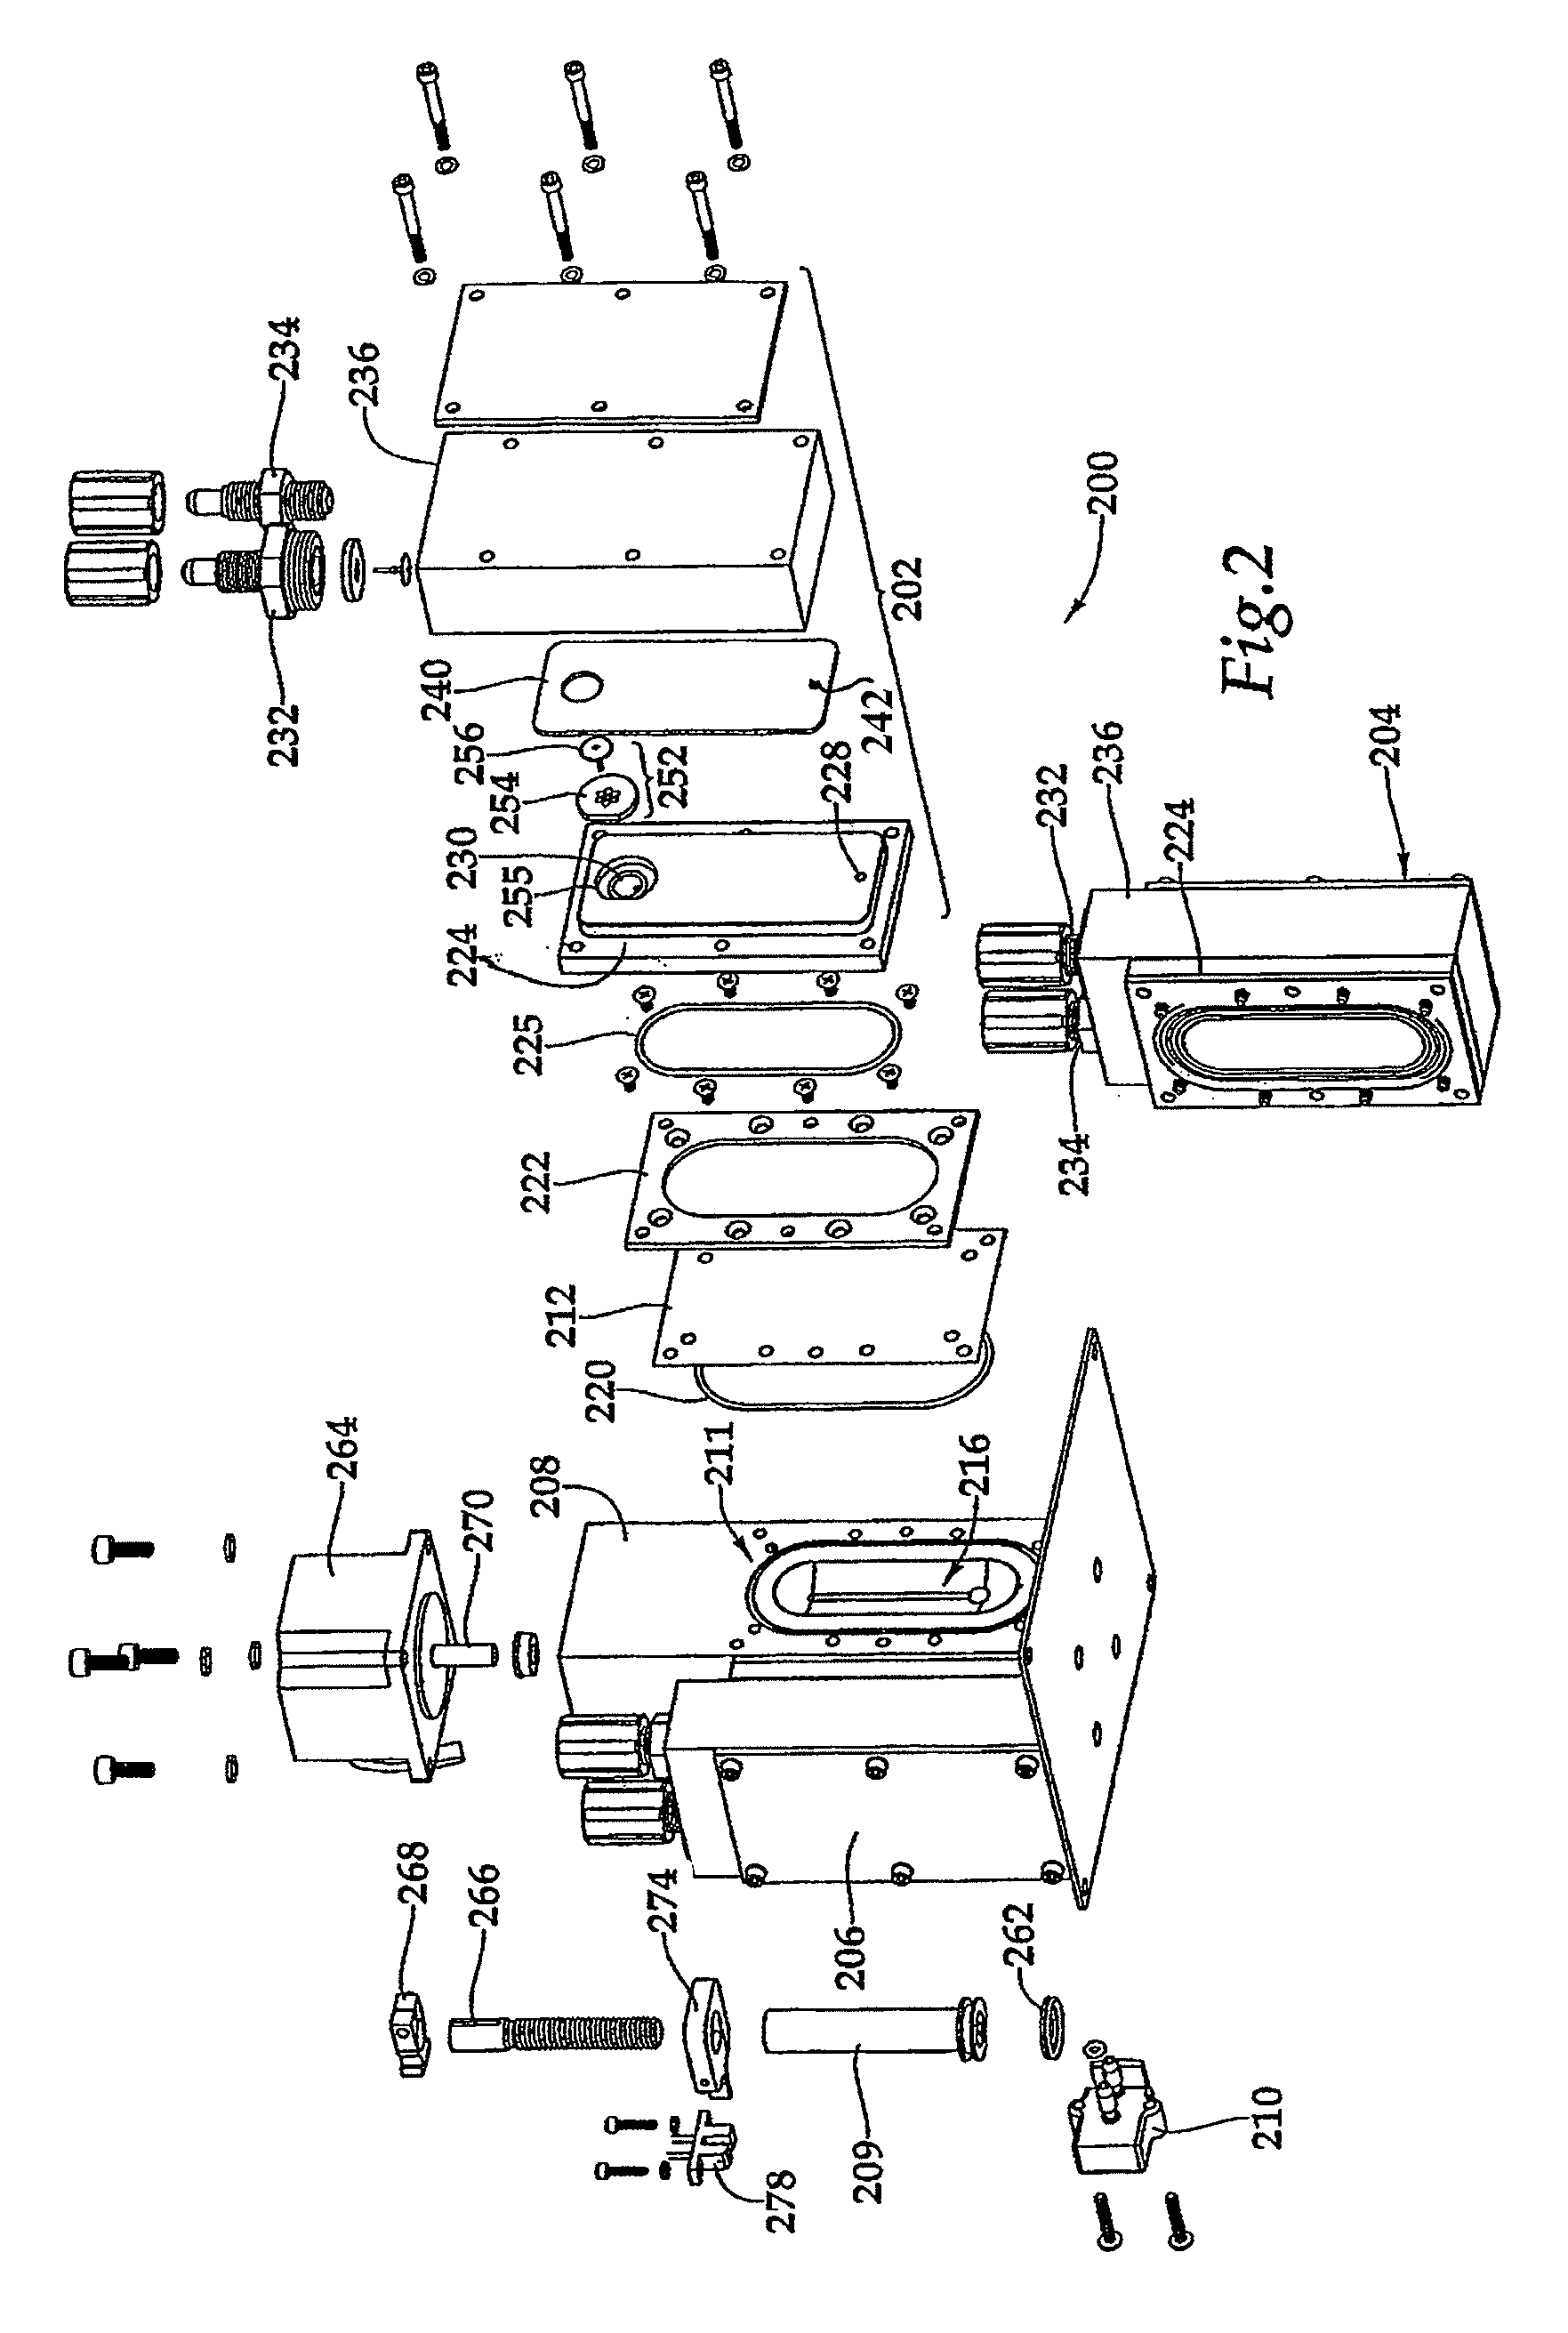 Precision pump having multiple heads and using an actuation fluid to pump one or more different process fluids